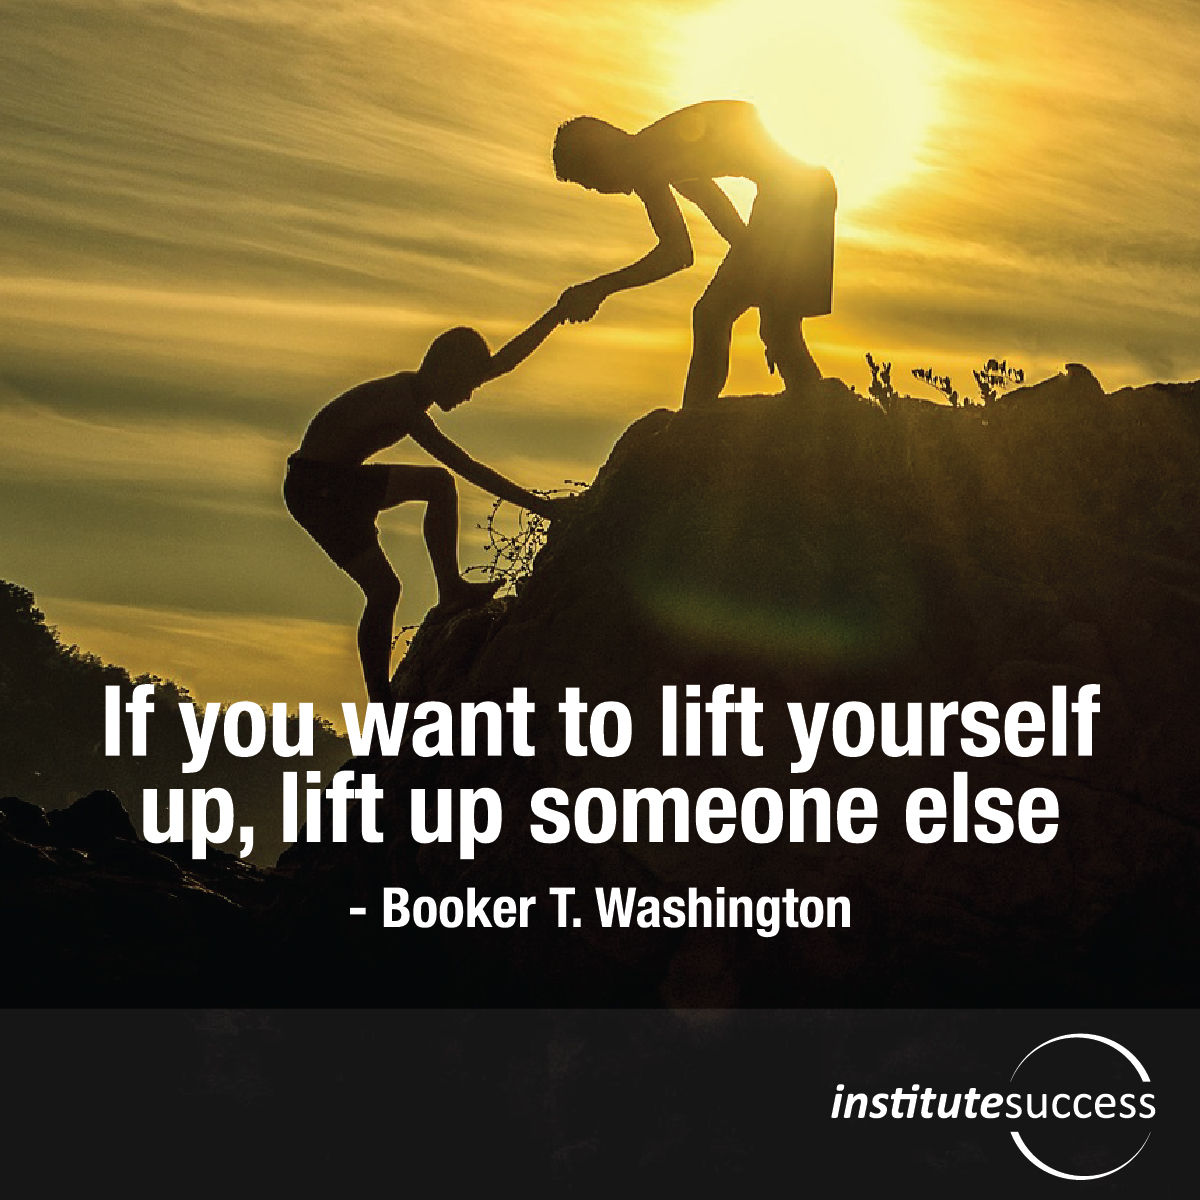 If you want to lift yourself up, lift up someone else – Booker T